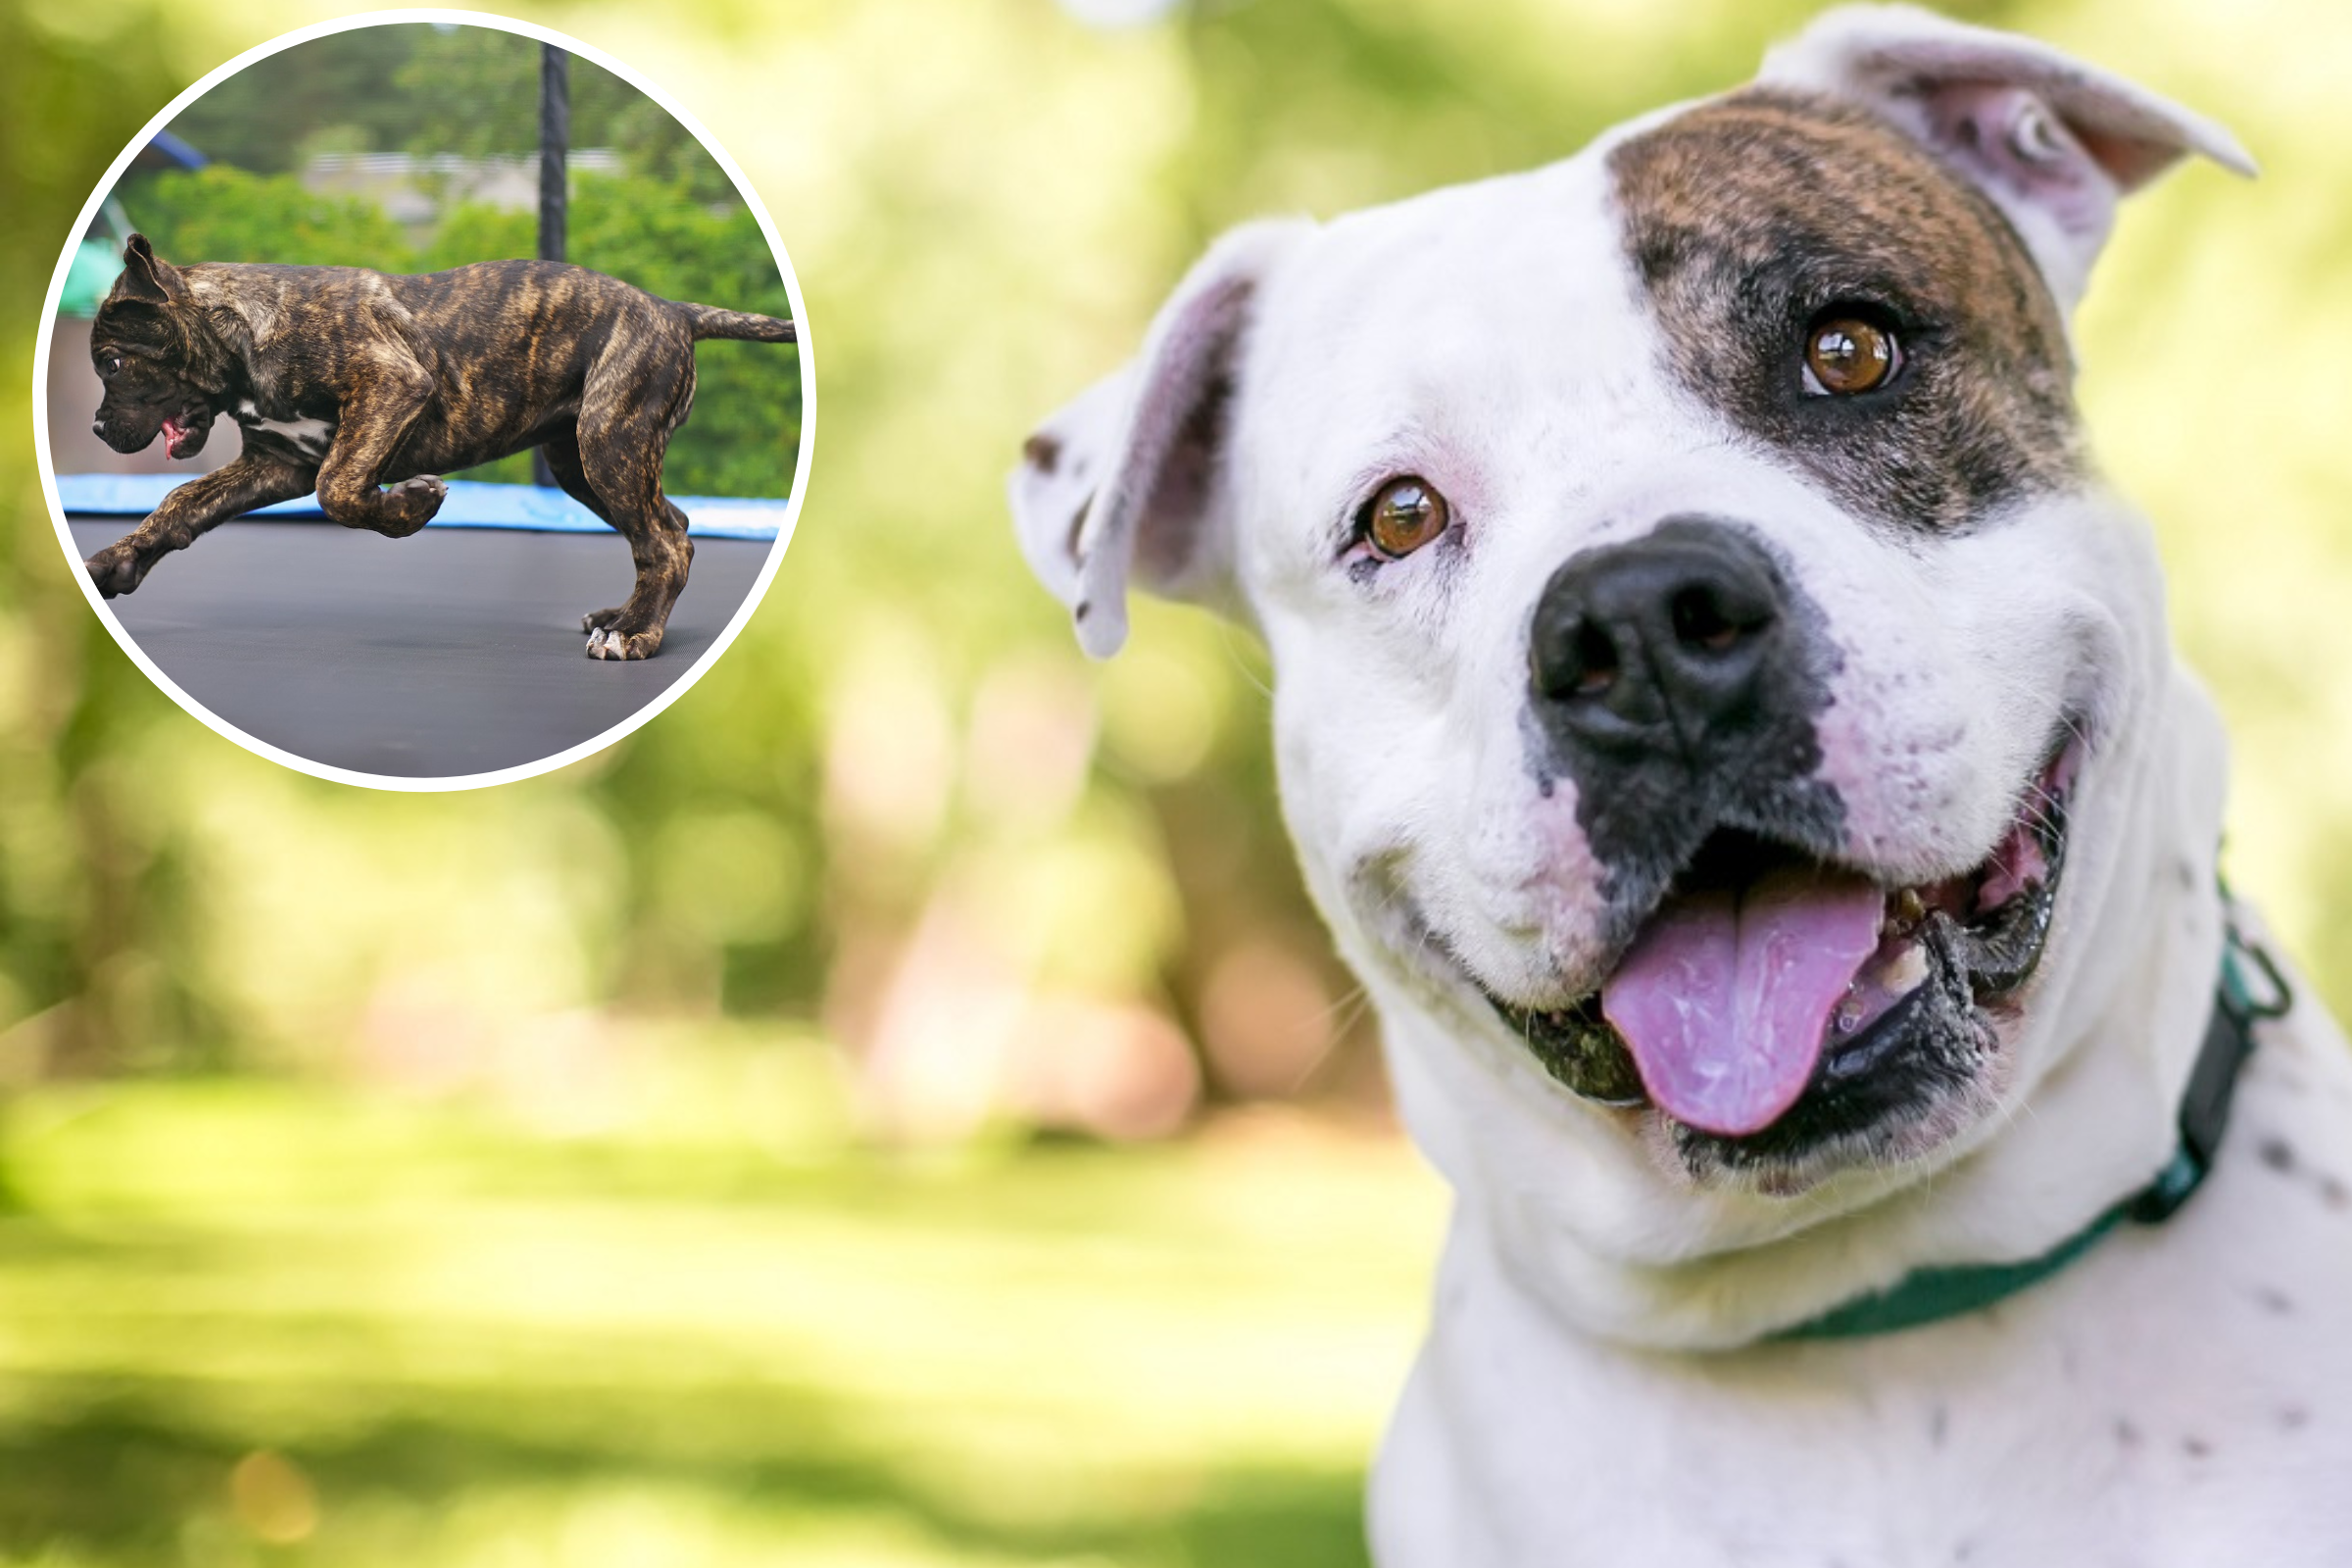 The internet is in stitches as American bully thinks he ‘owns’ the trampoline